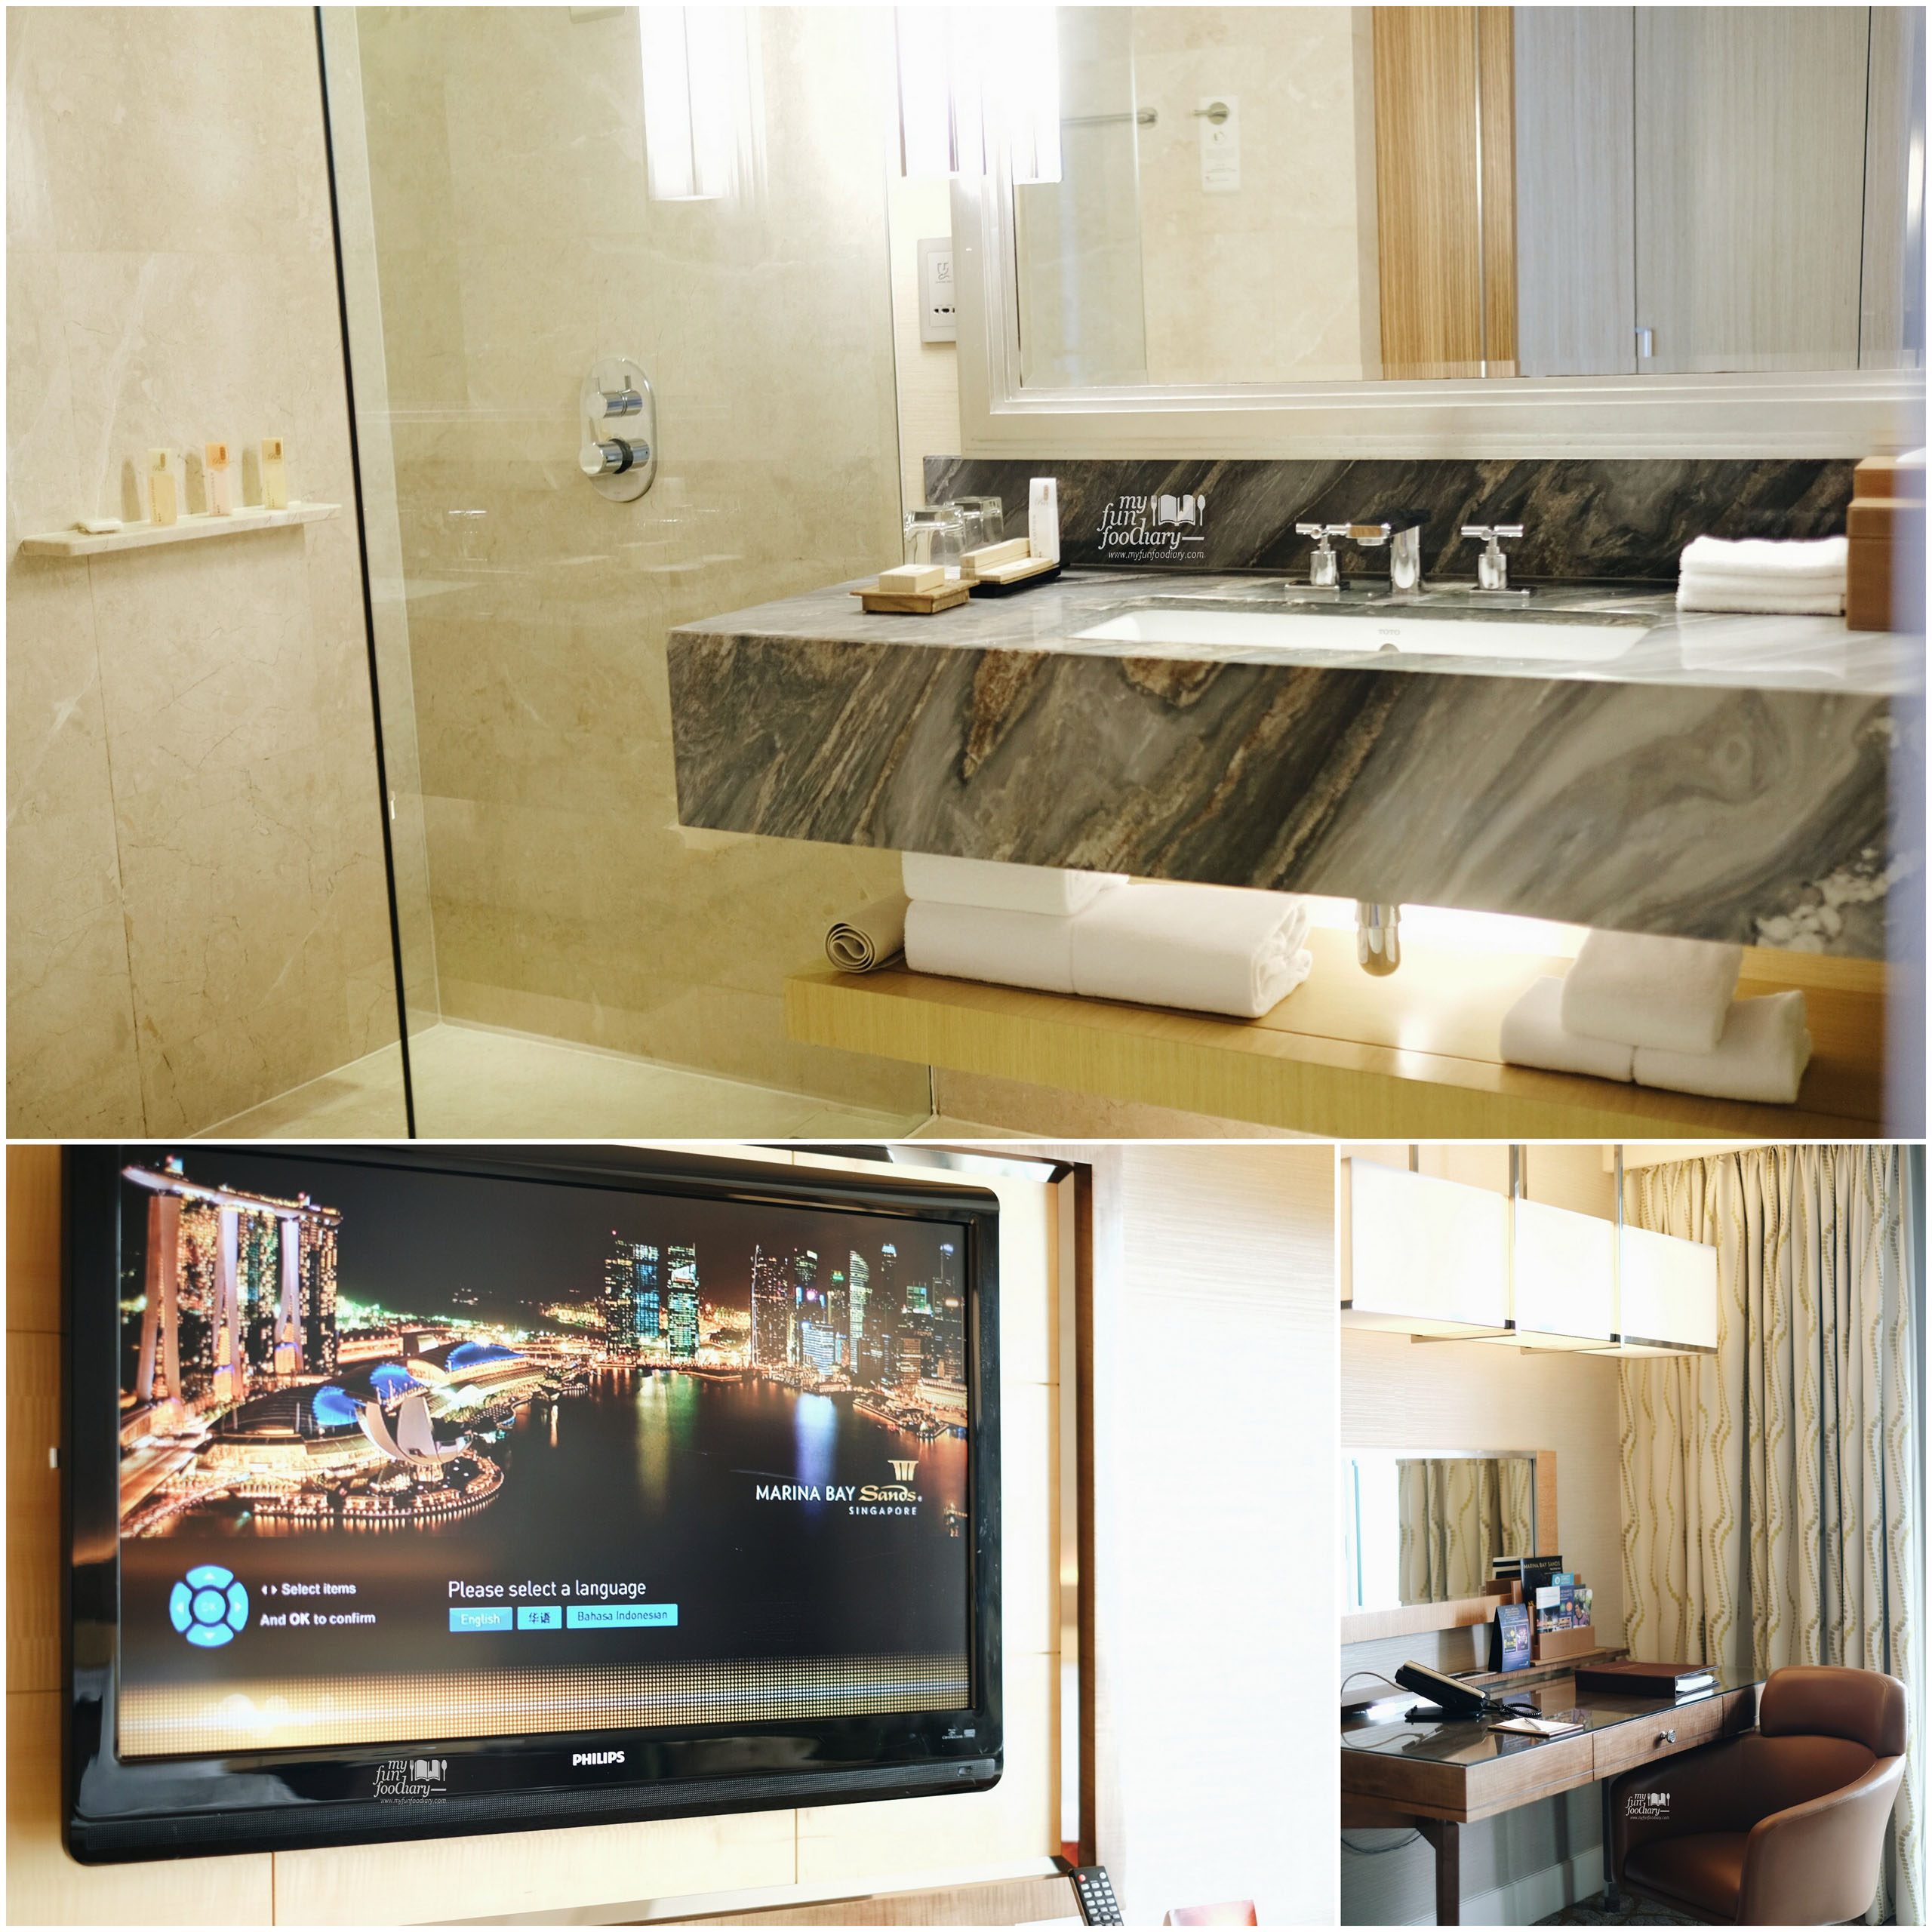 Huge Bathroom and Big TV Screen in my room 4318 at Marina Bay Sands Tower 3 by Myfunfoodiary